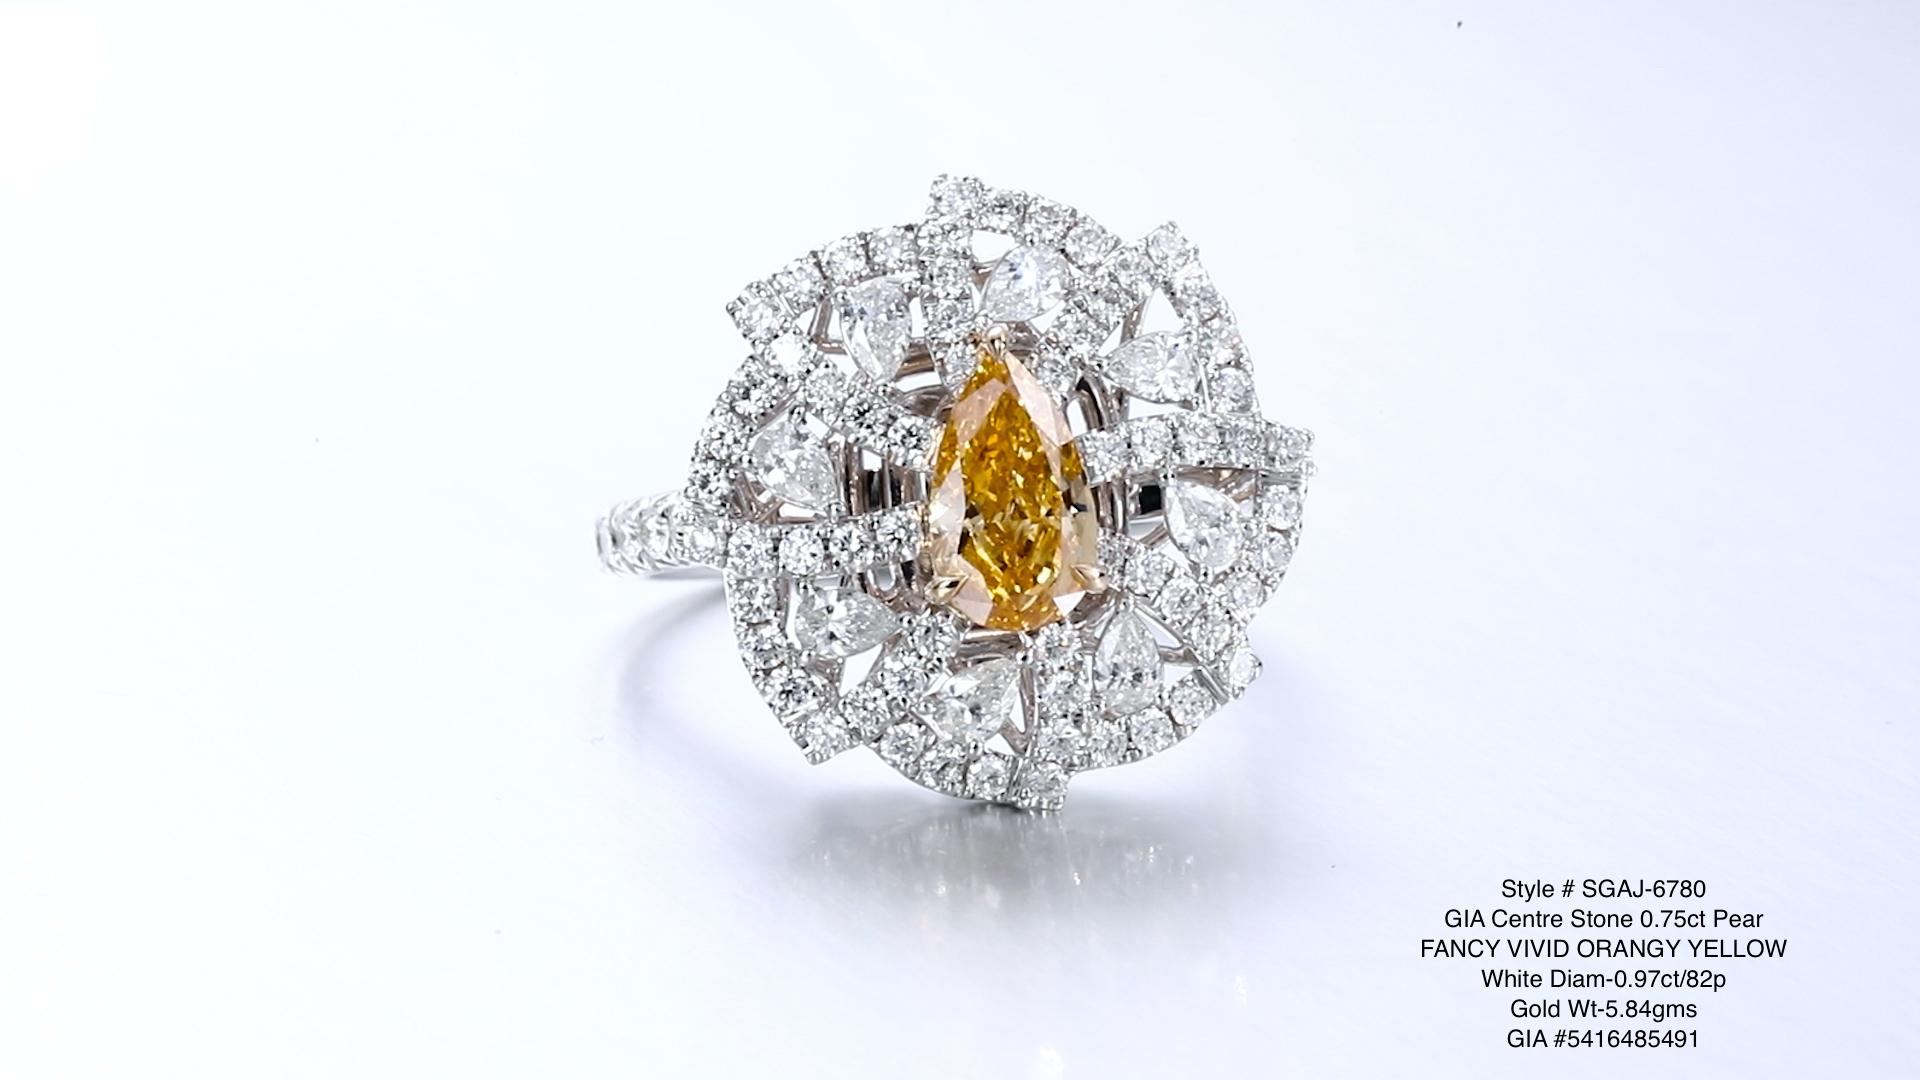 A breathtaking jewellery piece featuring a mesmerising 0.75ct pear-shaped natural fancy vivid orange-yellow diamond as its centrepiece. This extraordinary diamond is elegantly set in 18kt gold, creating a luxurious and captivating design.

The star